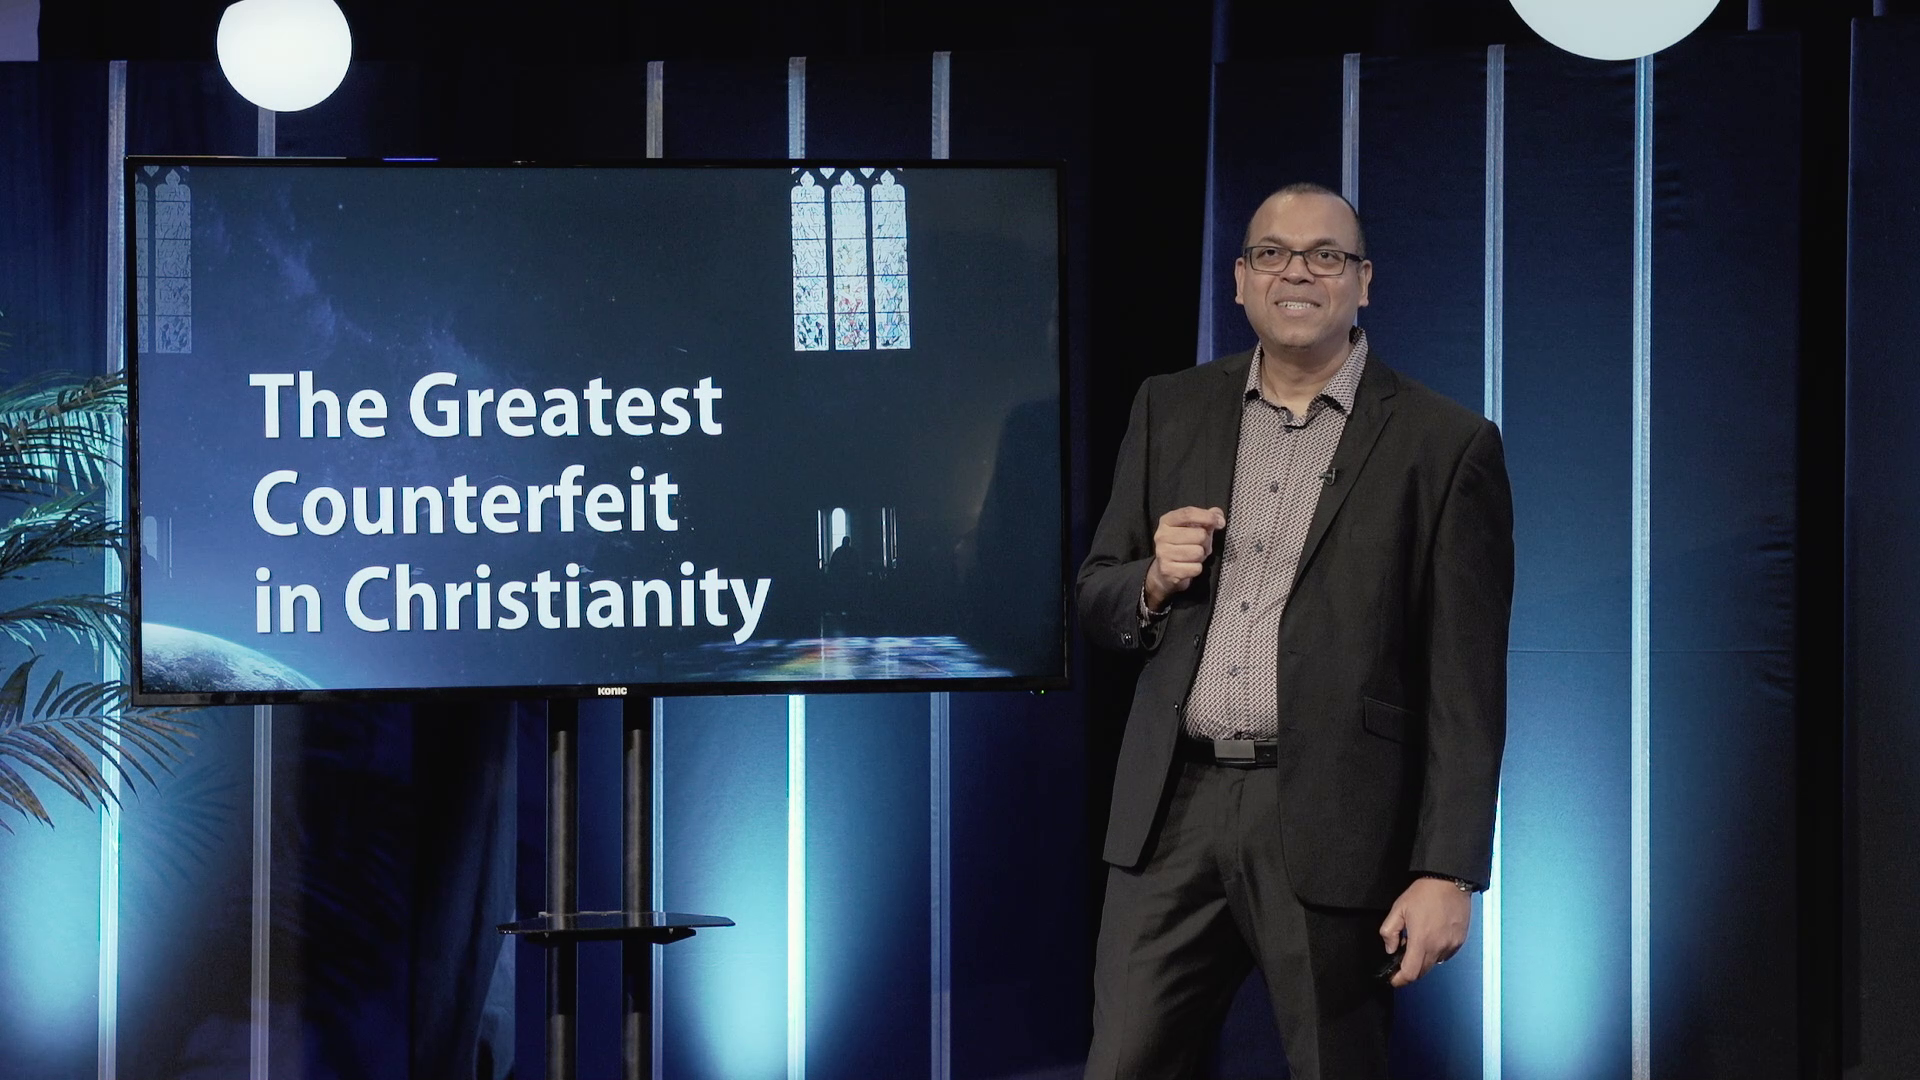 The Greatest Counterfeit in Christianity